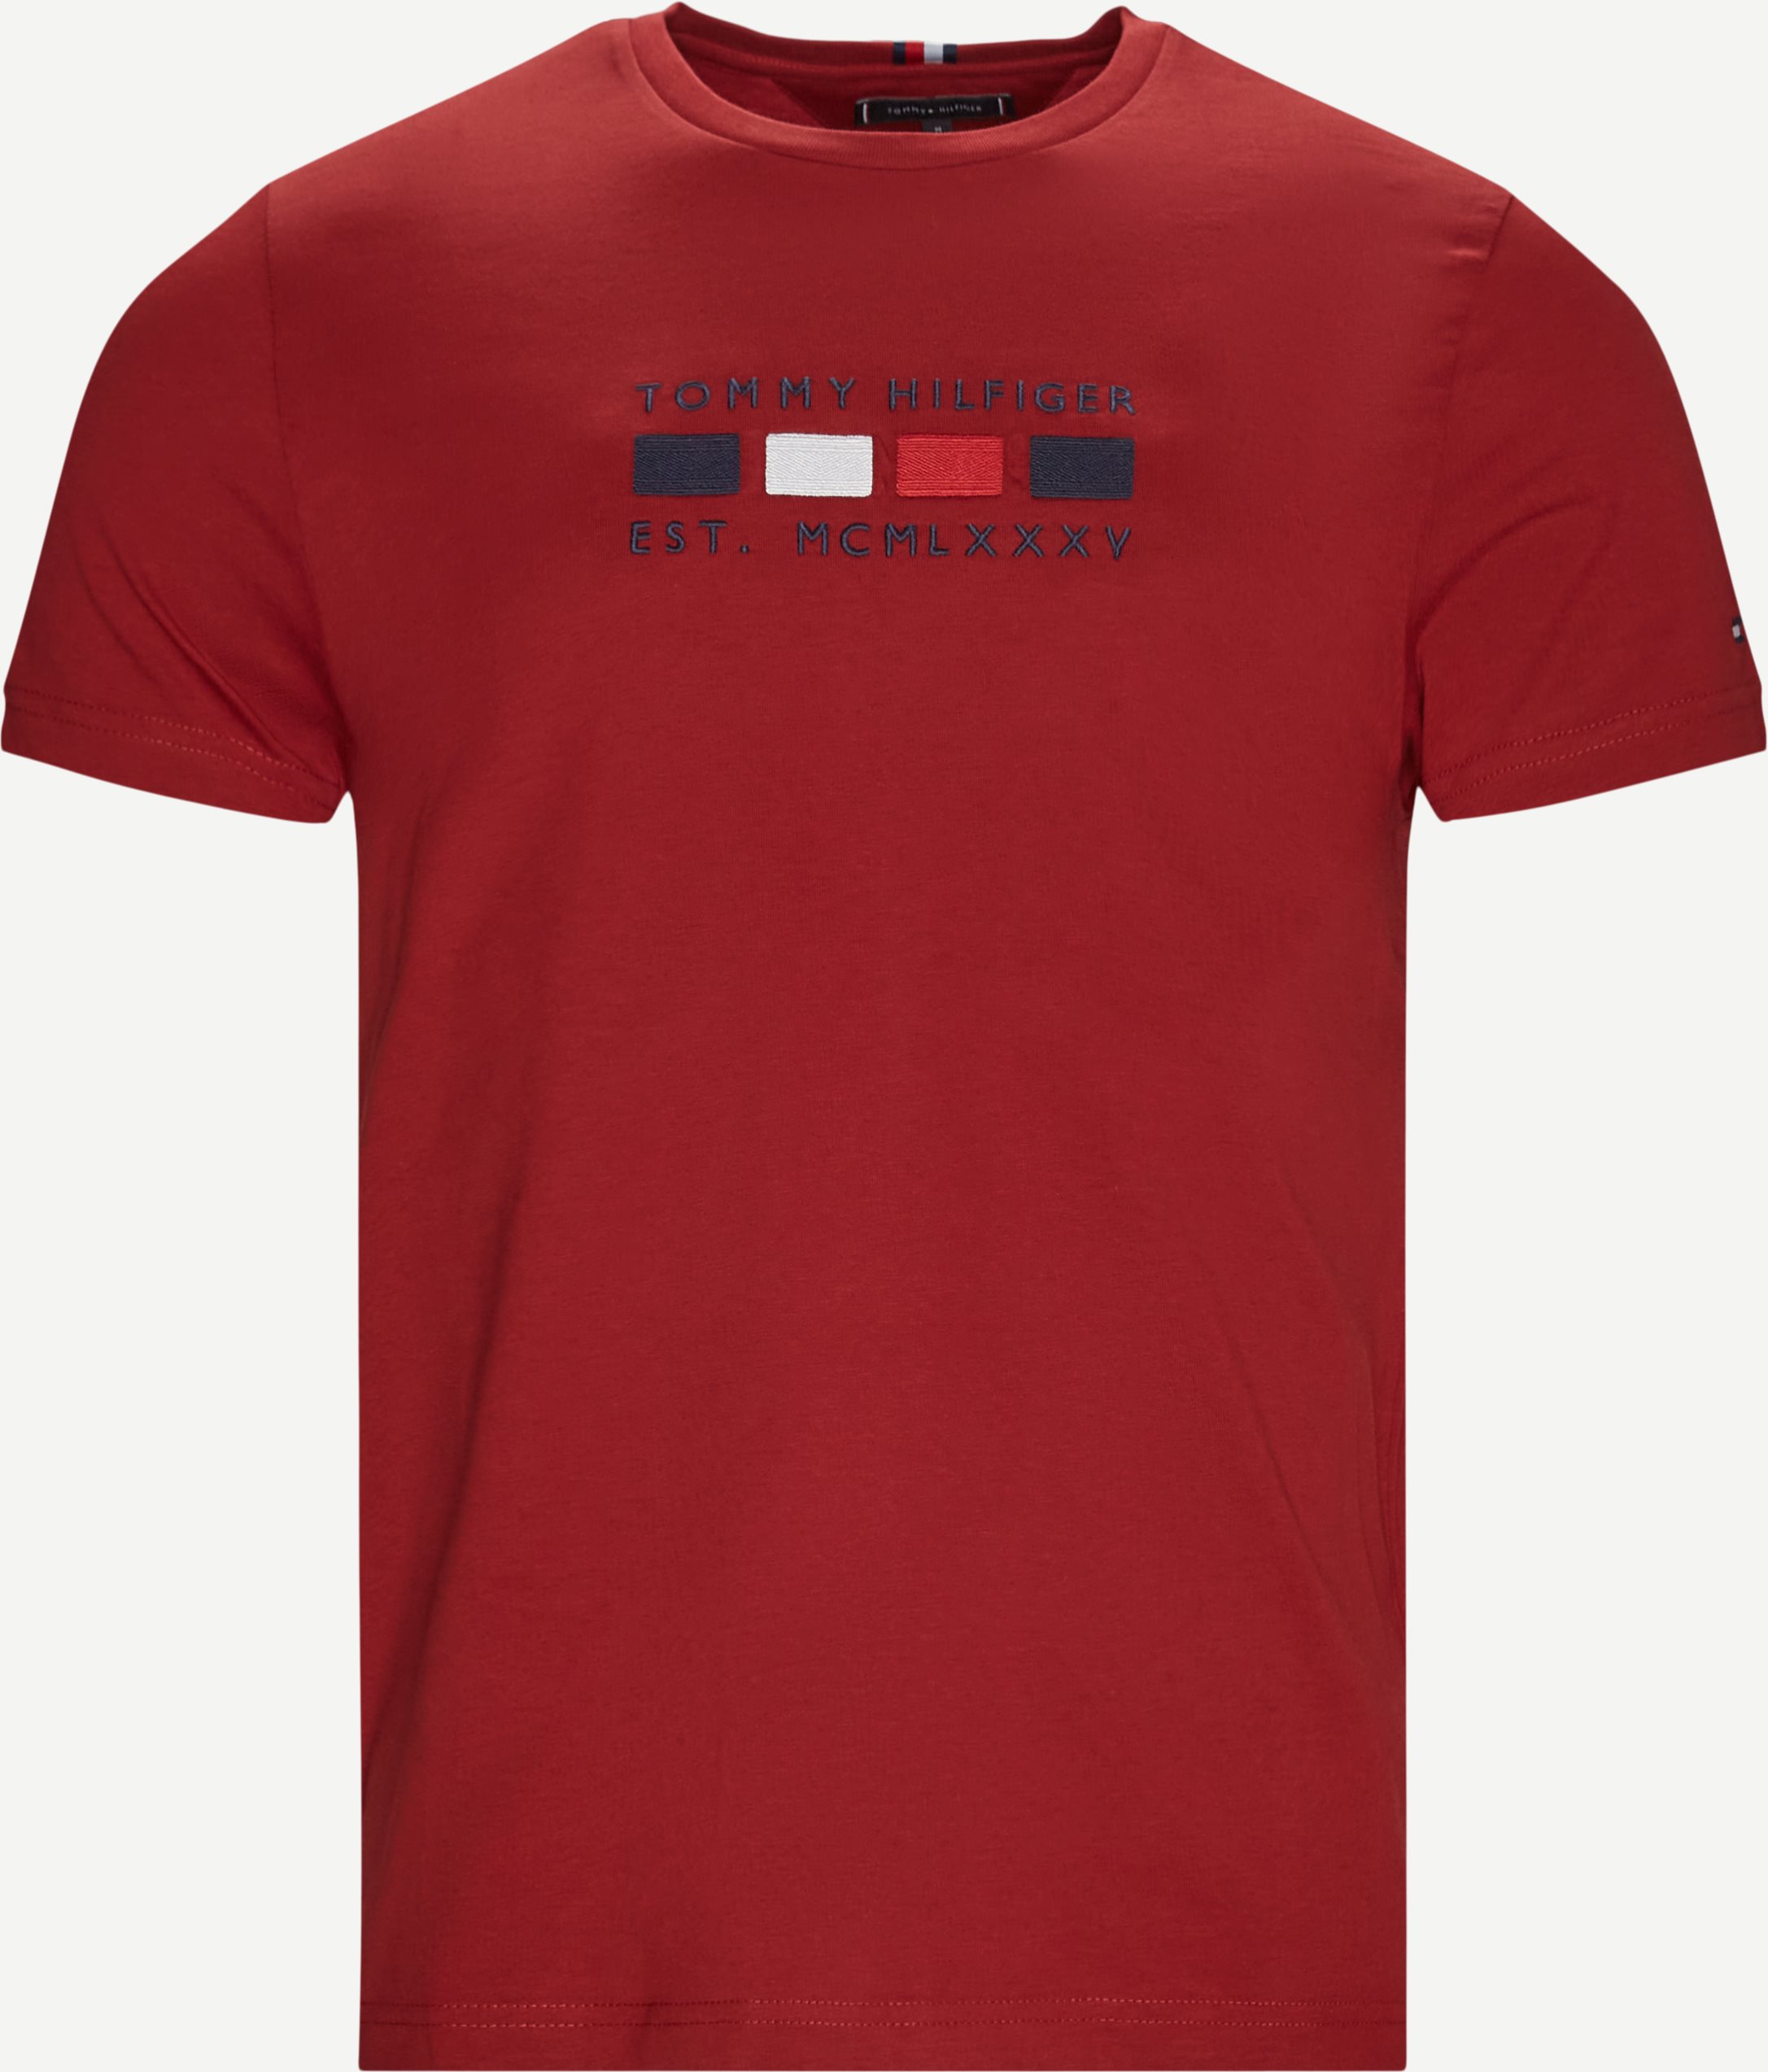 Four Flags Tee - T-shirts - Regular fit - Red